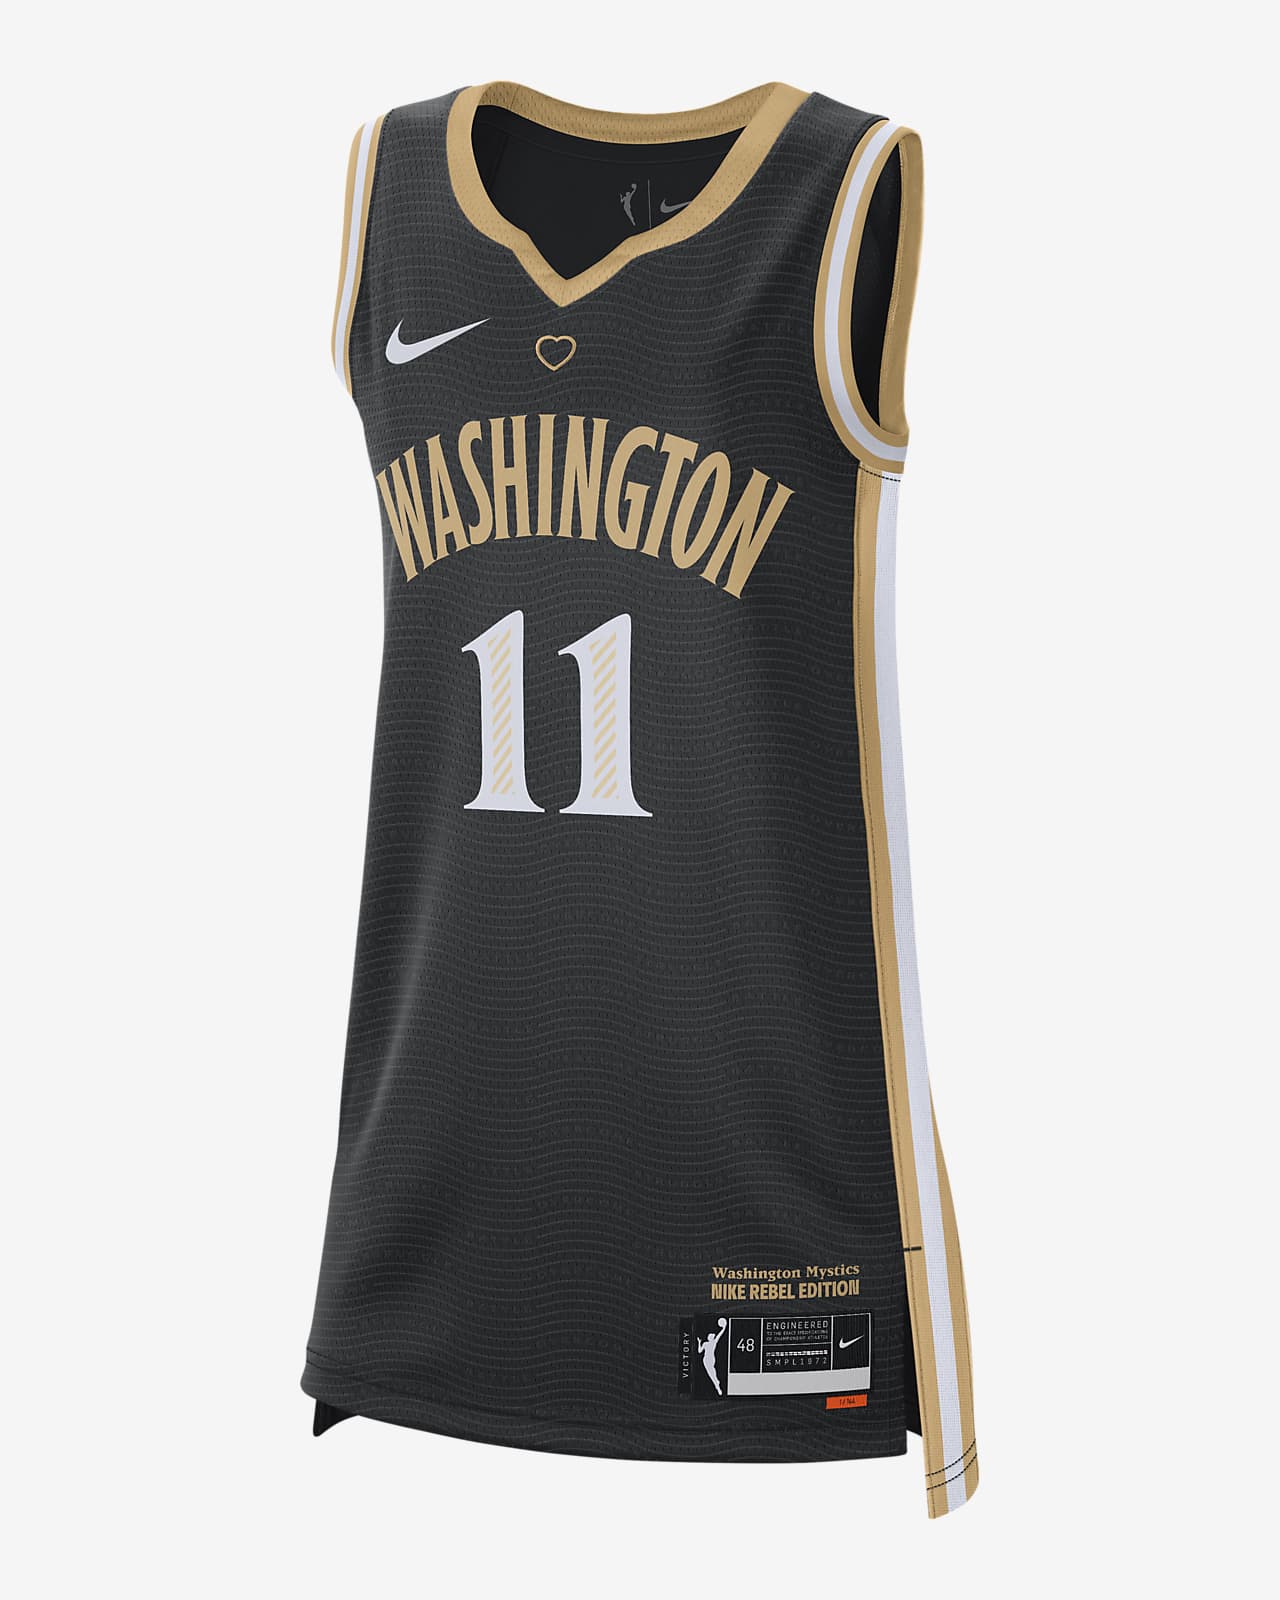 WNBA: The Mystics and all teams to have “City” Edition jerseys in